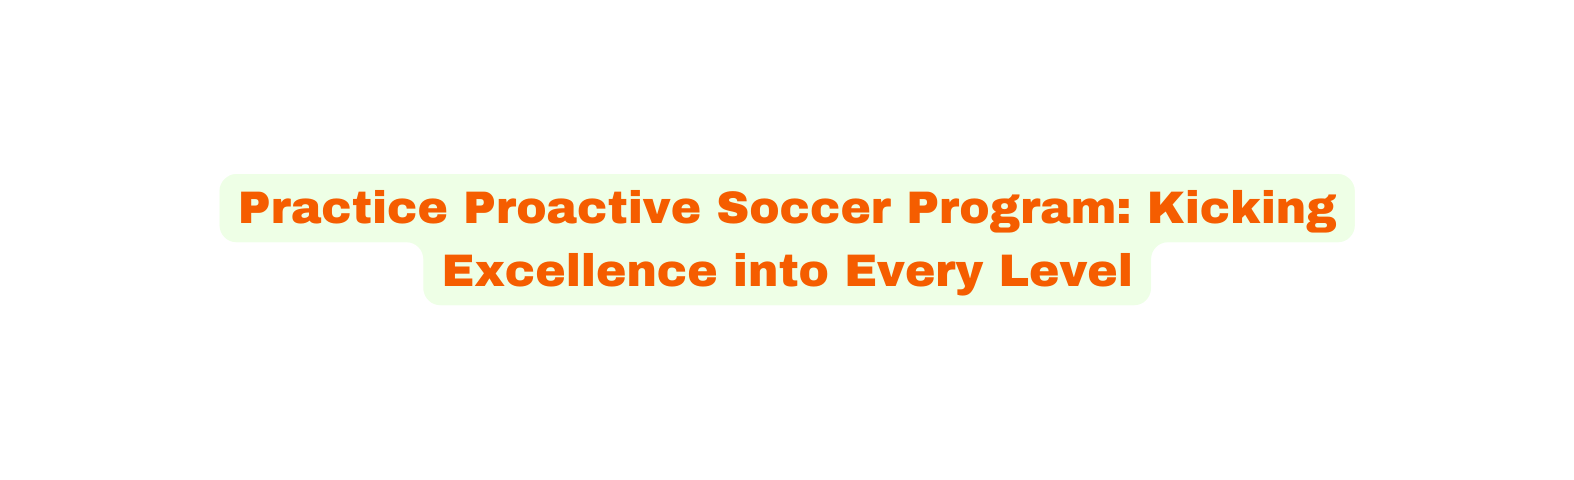 Practice Proactive Soccer Program Kicking Excellence into Every Level